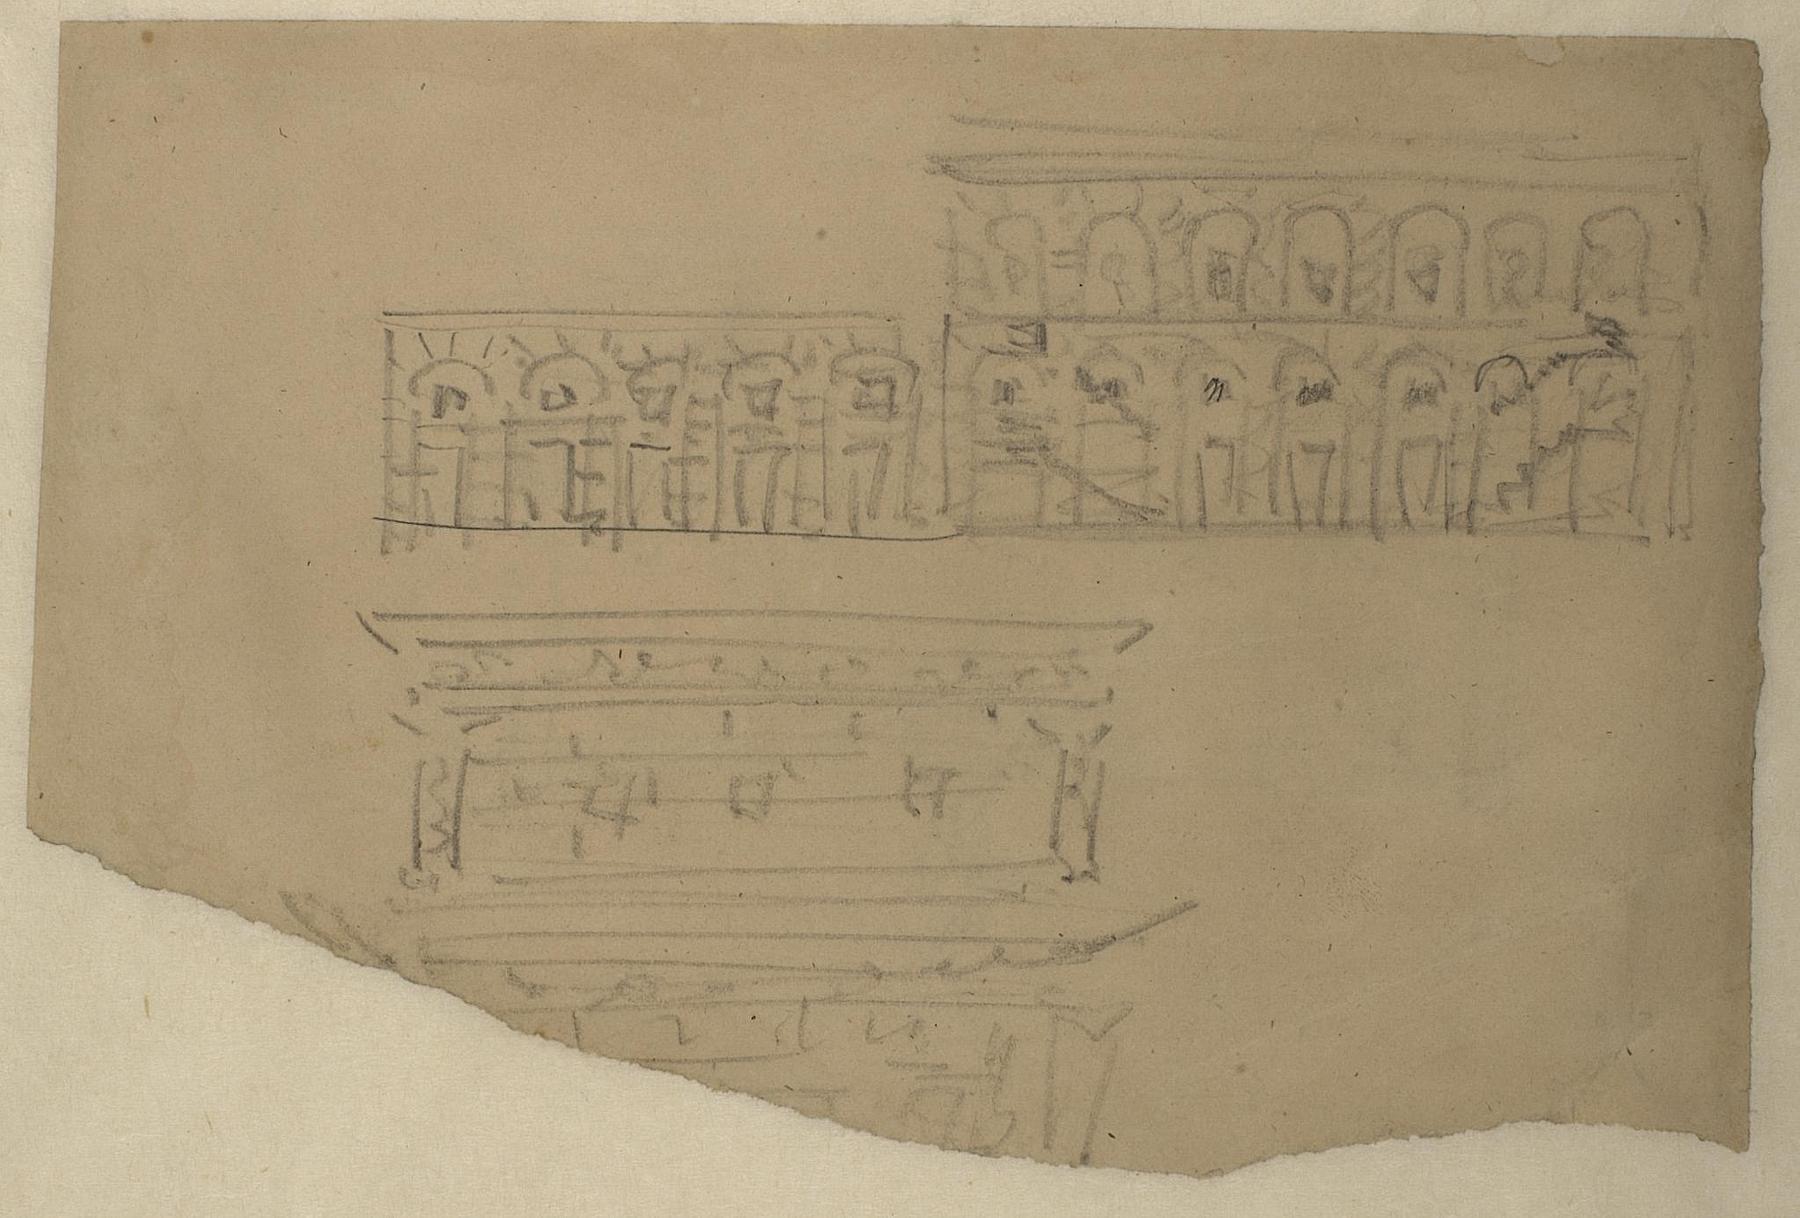 Theatre, Draft for Bindesbøll's application for admisson to The Royal Academy of Fine Arts, D1756